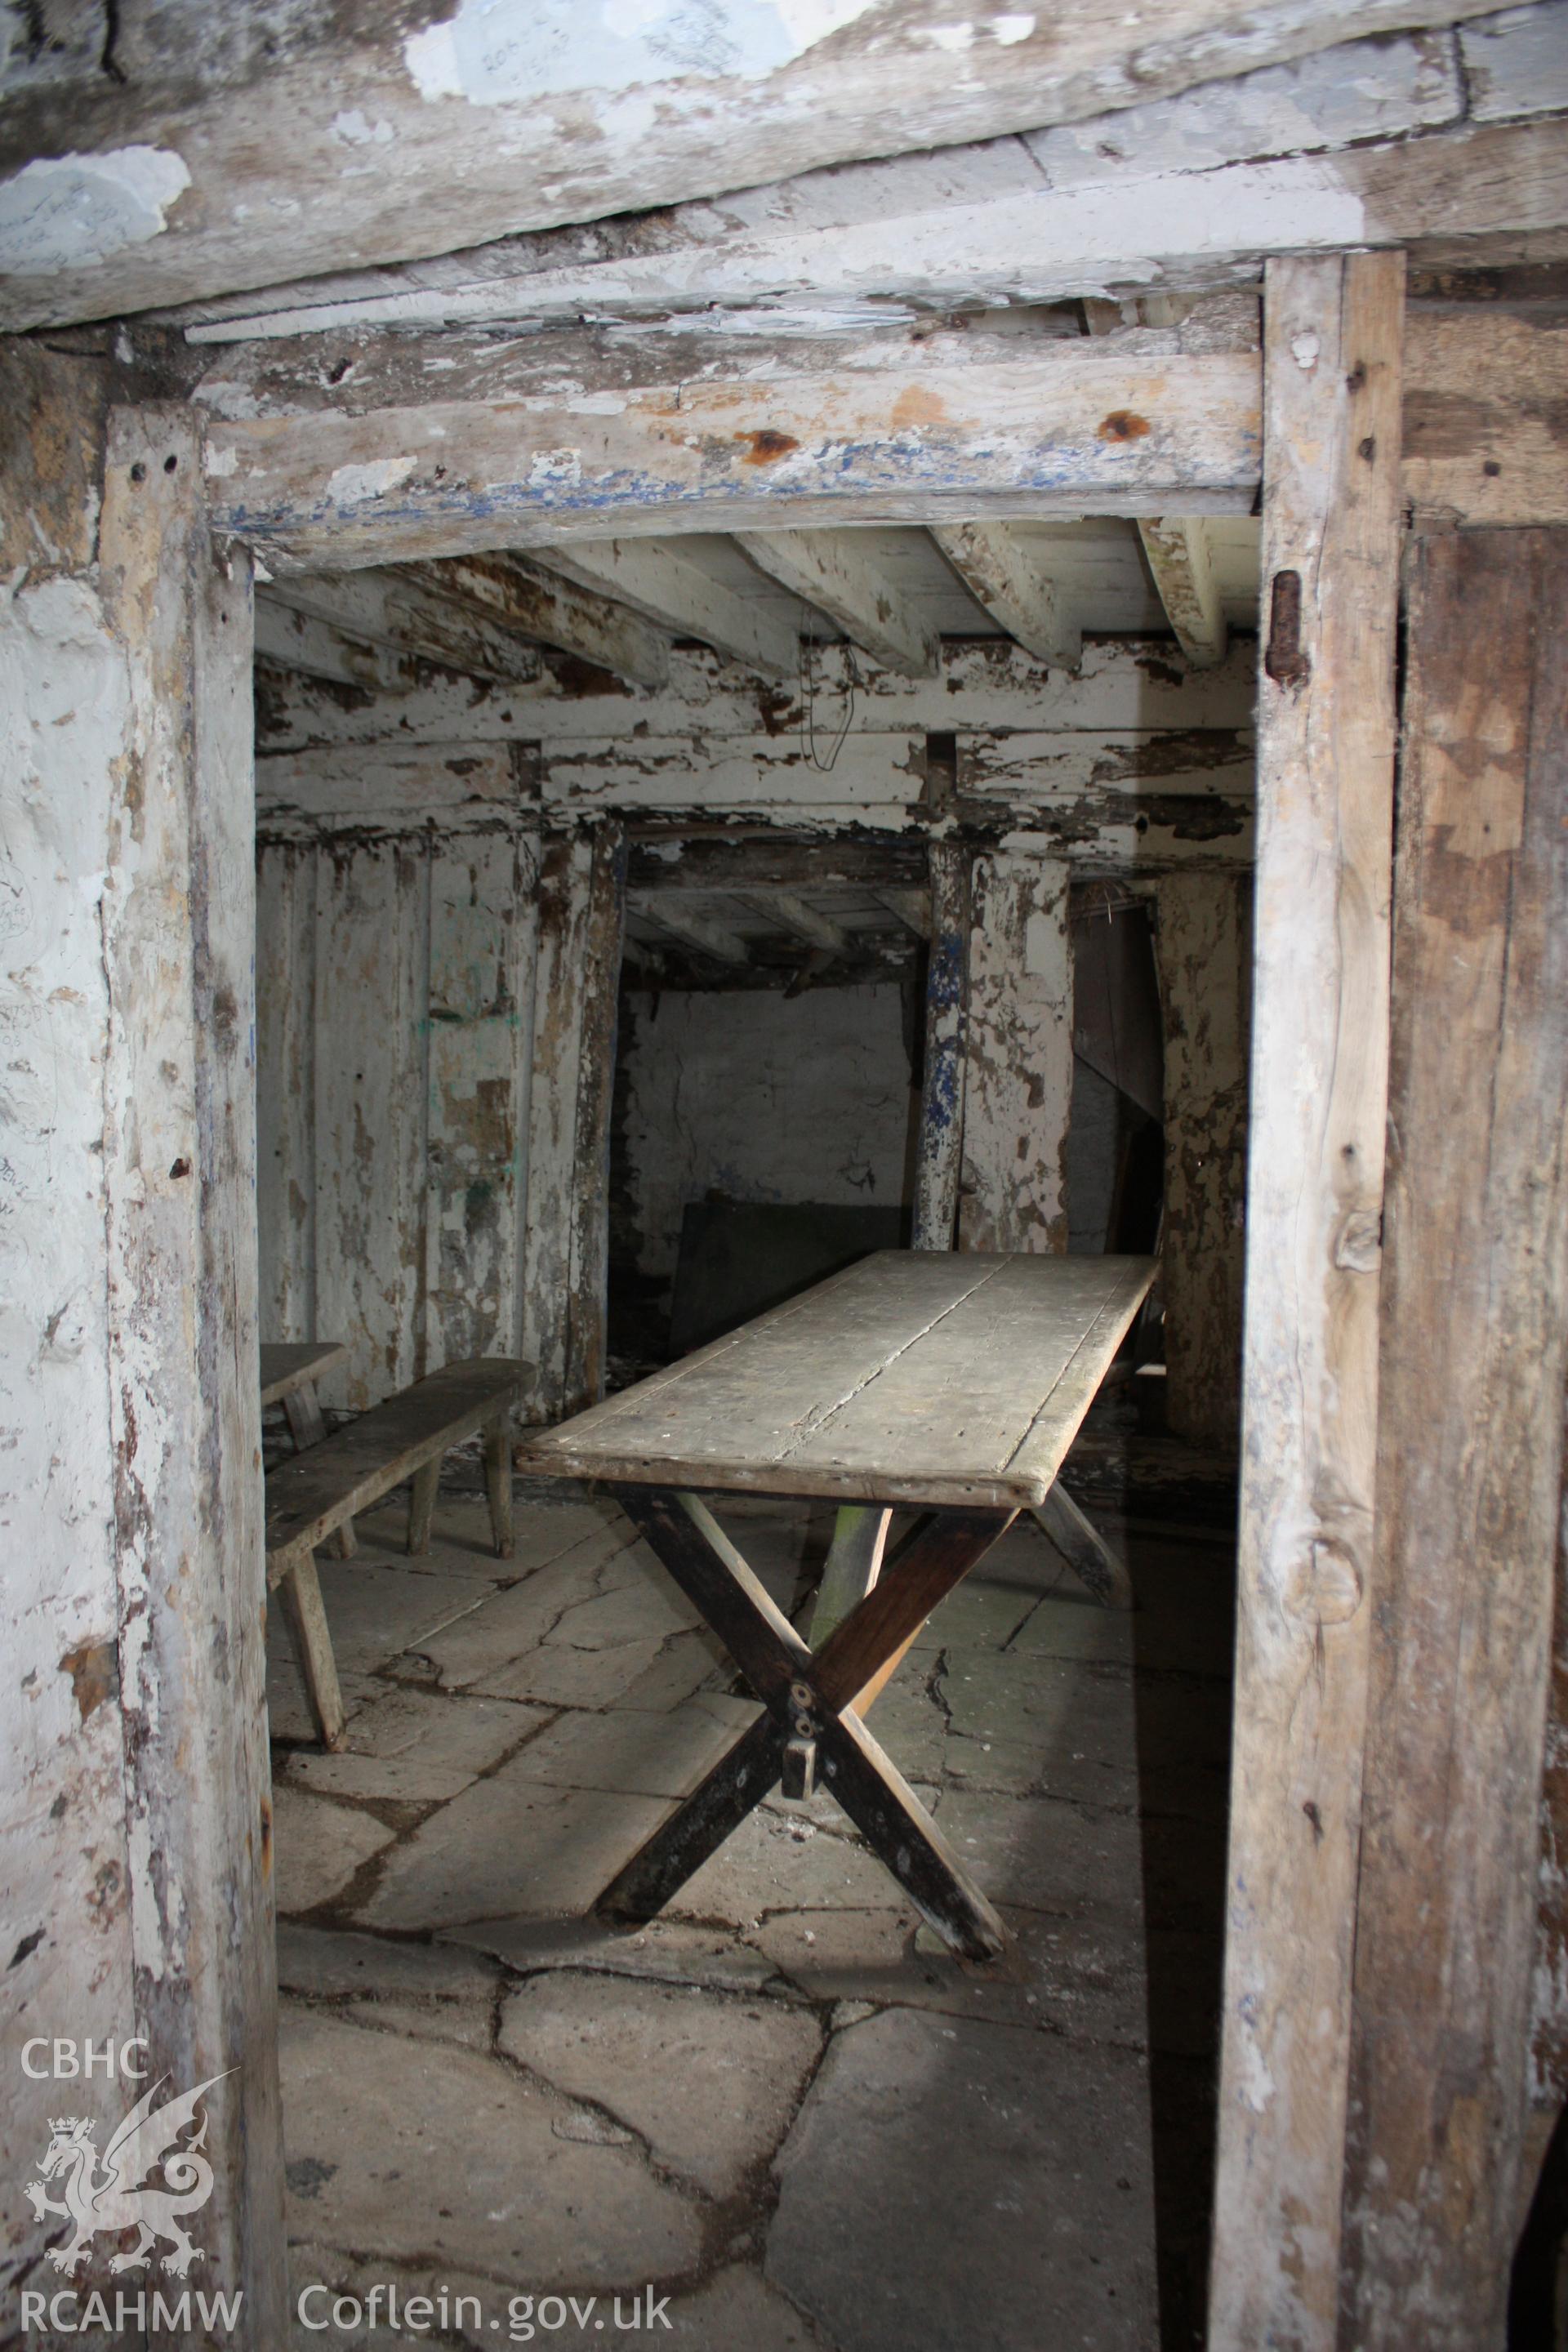 The view into the kitchen with the shearers’ bench and table. Photographed by Richard Suggett of RCAHMW in June 2020.